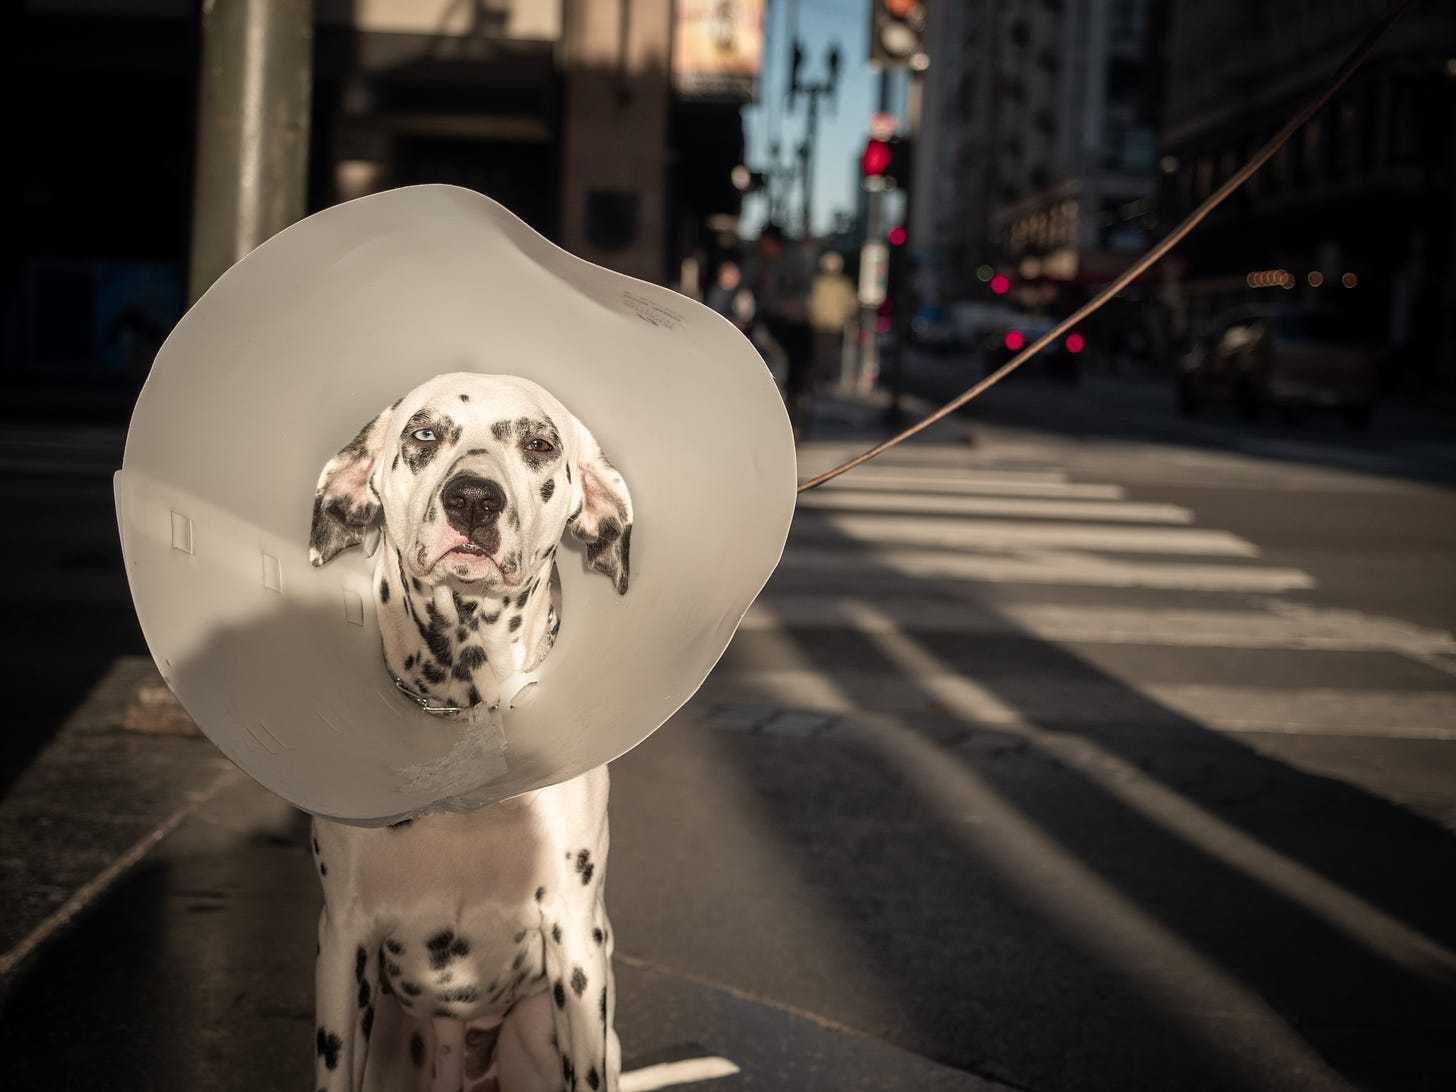 Photo of a black and white dog wearing a cone of shame